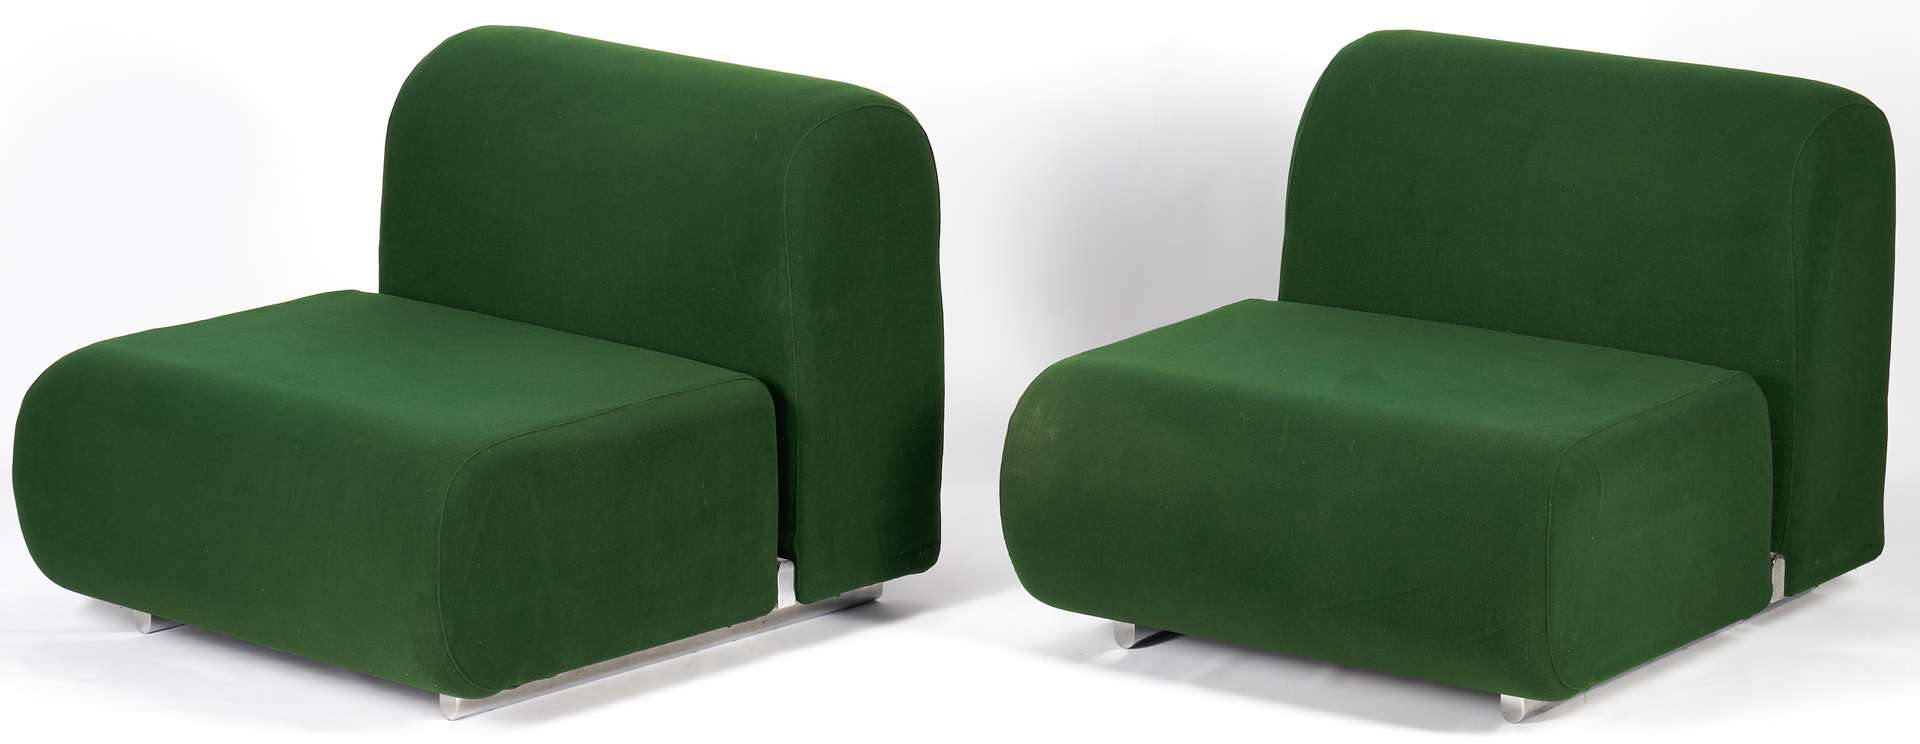 Lot 550: Pair of Labeled Knoll Chairs by Kazuhide Takamaha